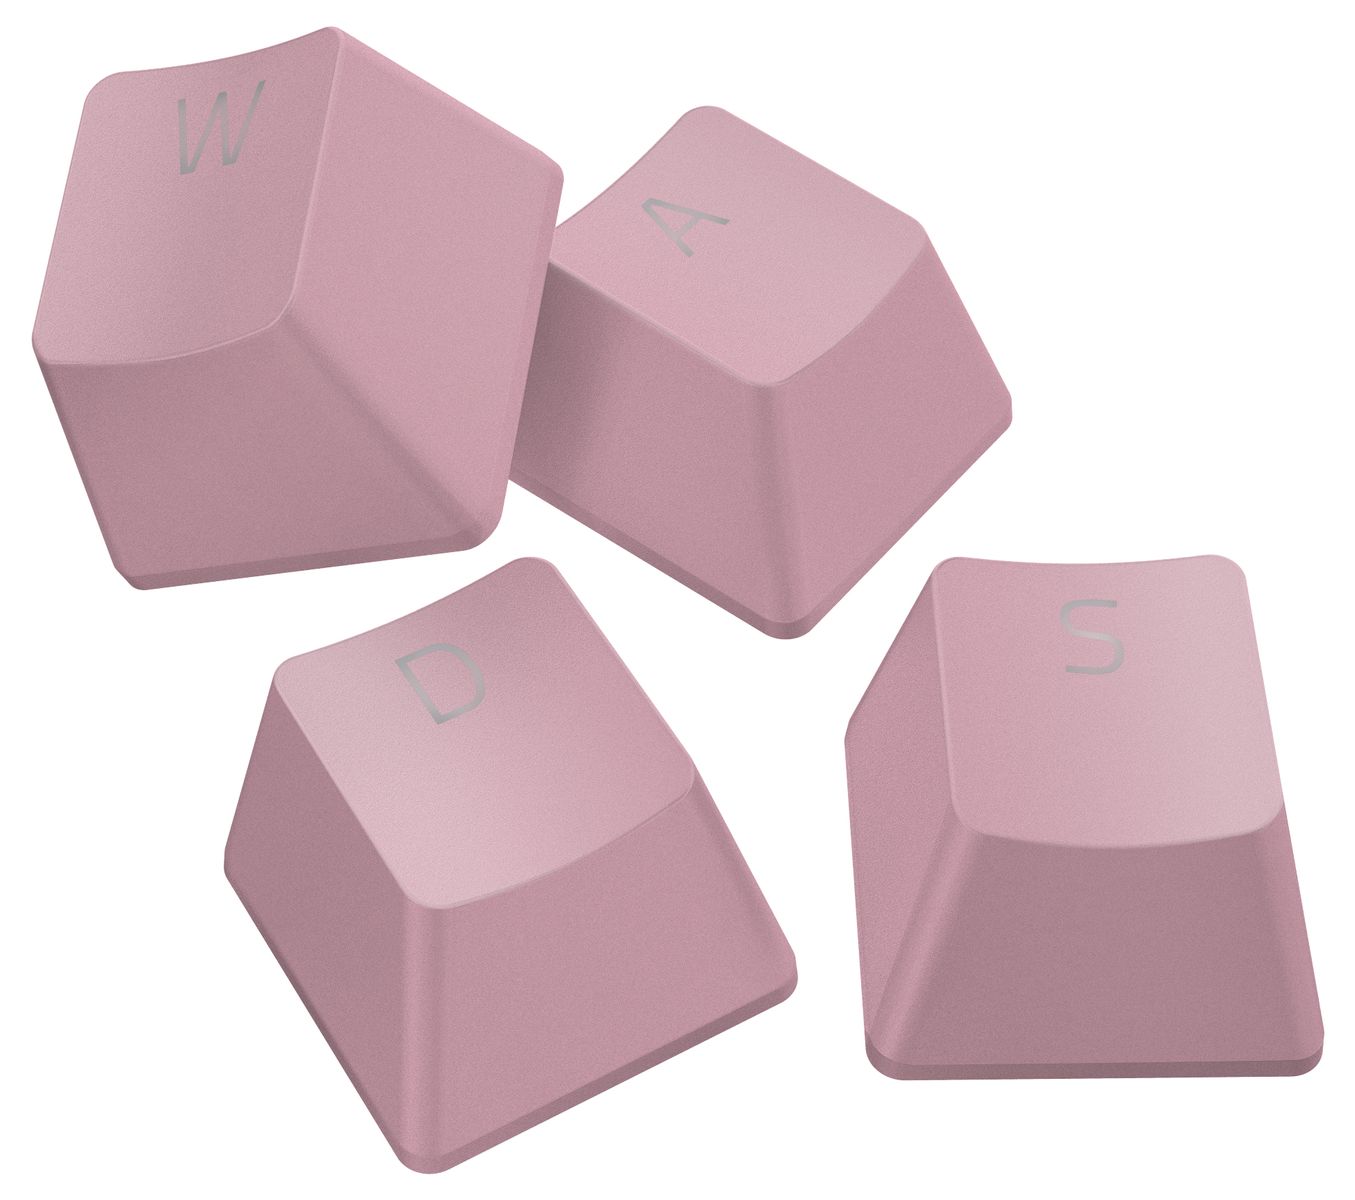 RAZER Doubleshot PBT Keycap Upgrade Kit for Mechanical and Optical Keyboards - Compatible with 104/105 US and UK Standard Layouts - Pink - (GBR Layout - QWERTY)